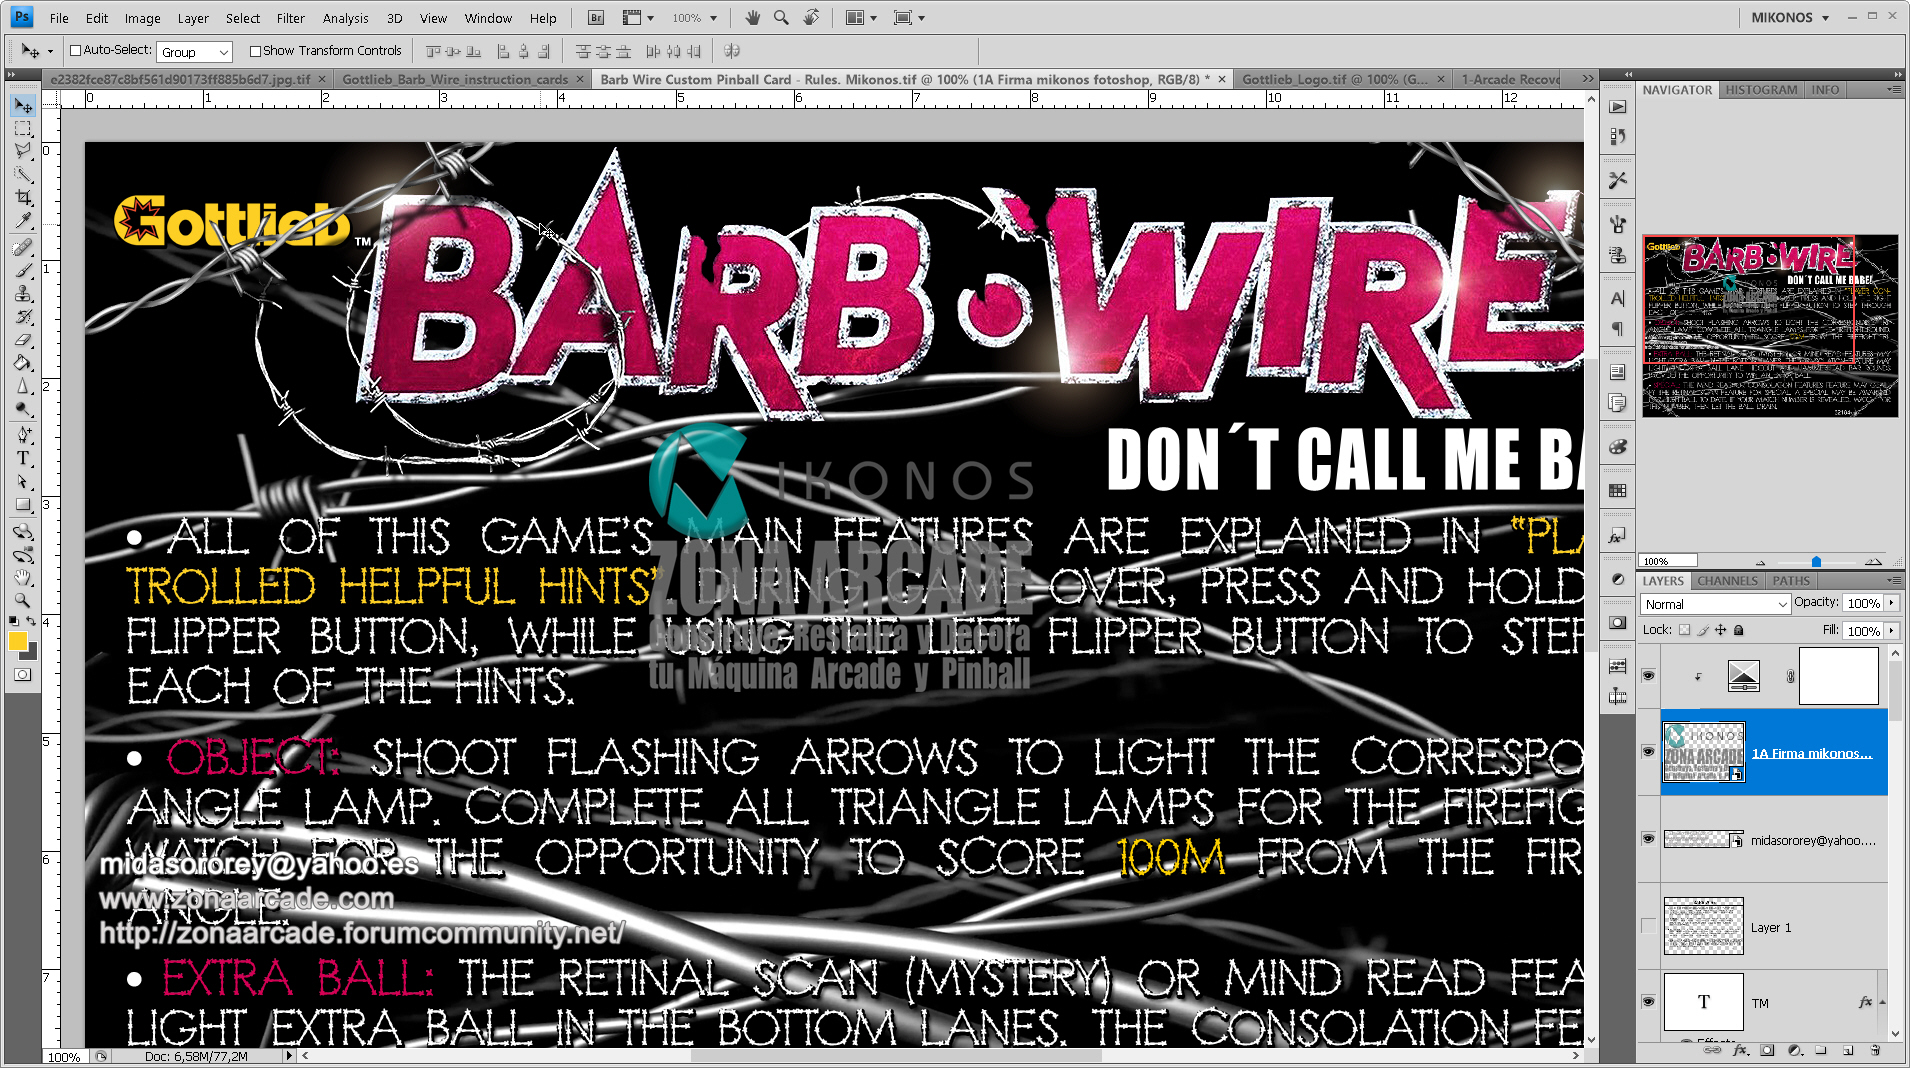 Barb Wire Pinball Card Customized - Rules. Mikonos1